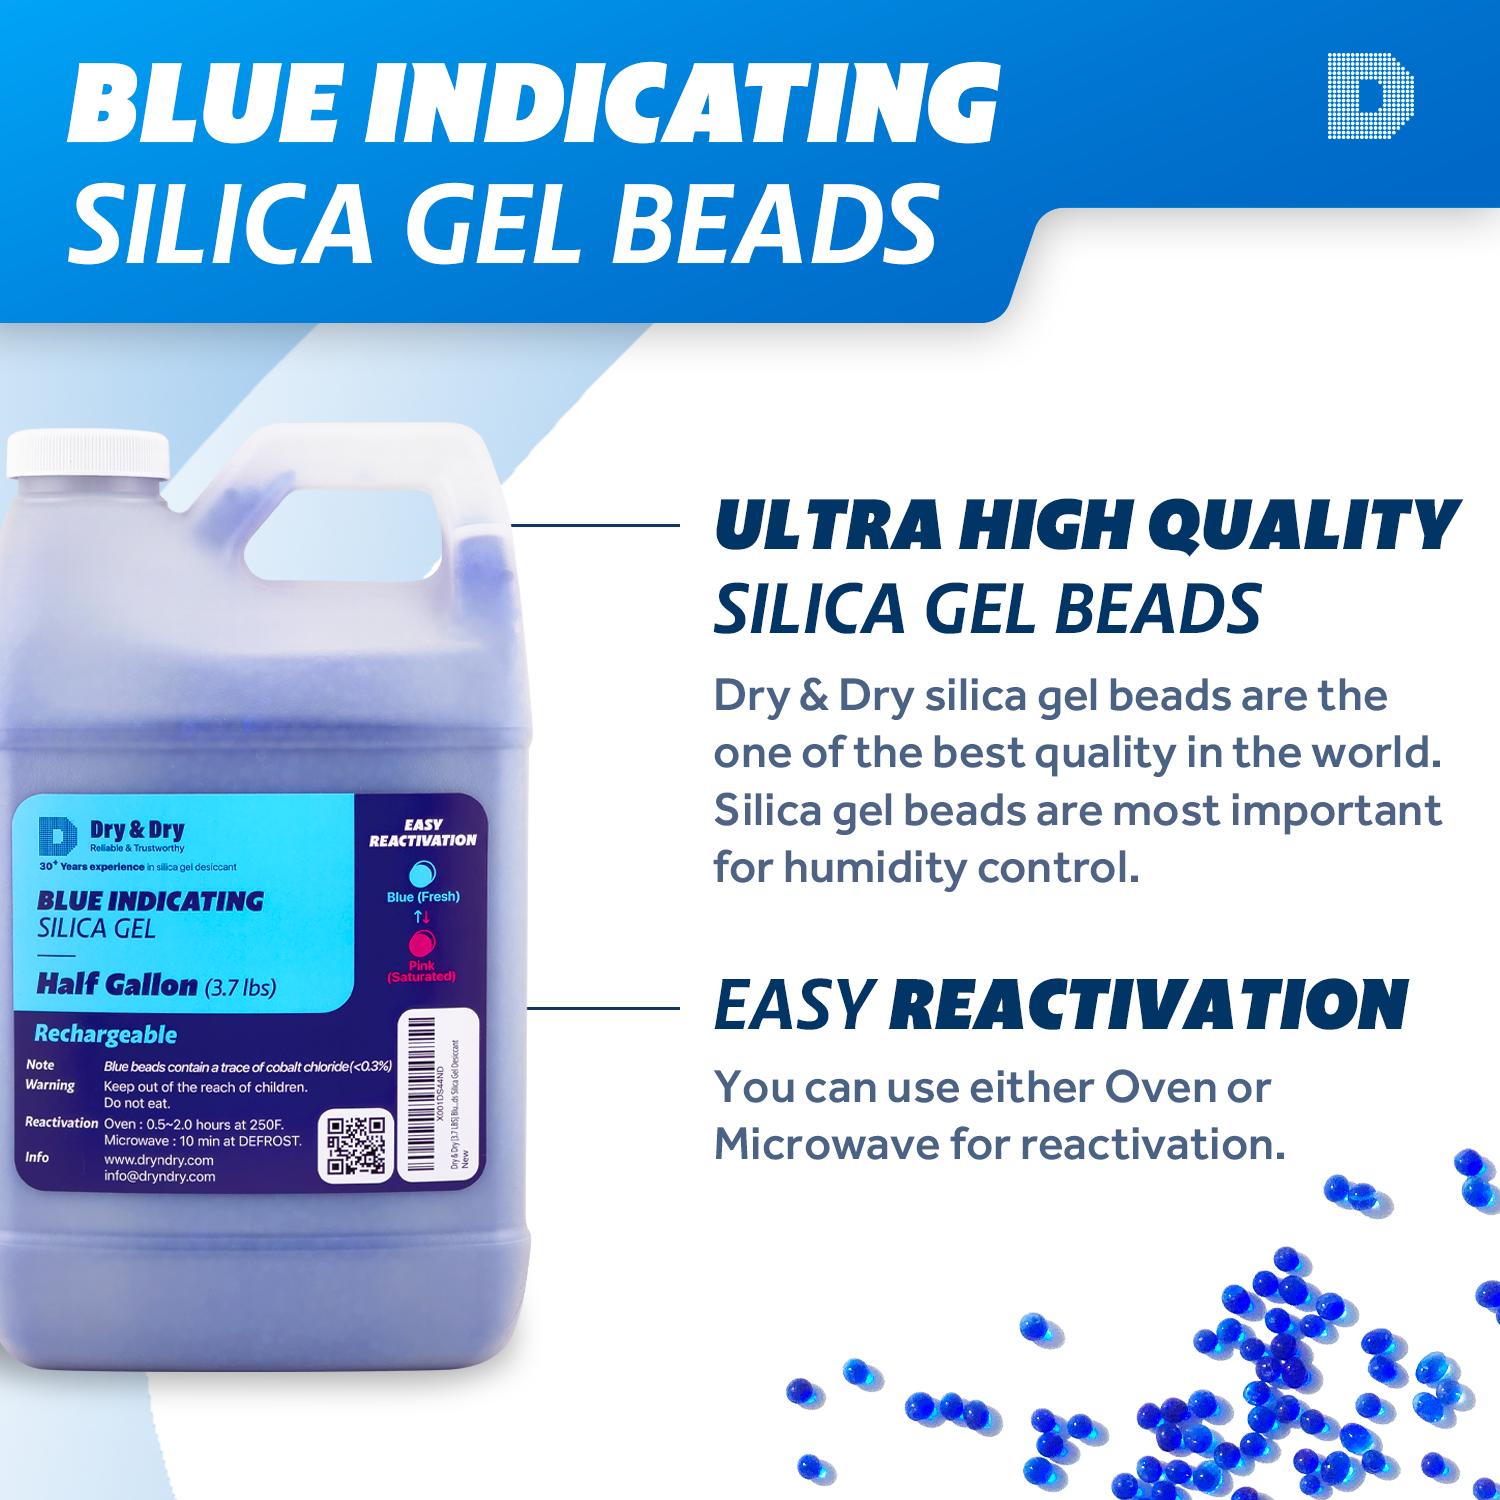 1/2 Gallon Premium Blue Indicating Silica Gel Beads(Industry Standard 3-5  mm) - 3.7 LBS Reusable